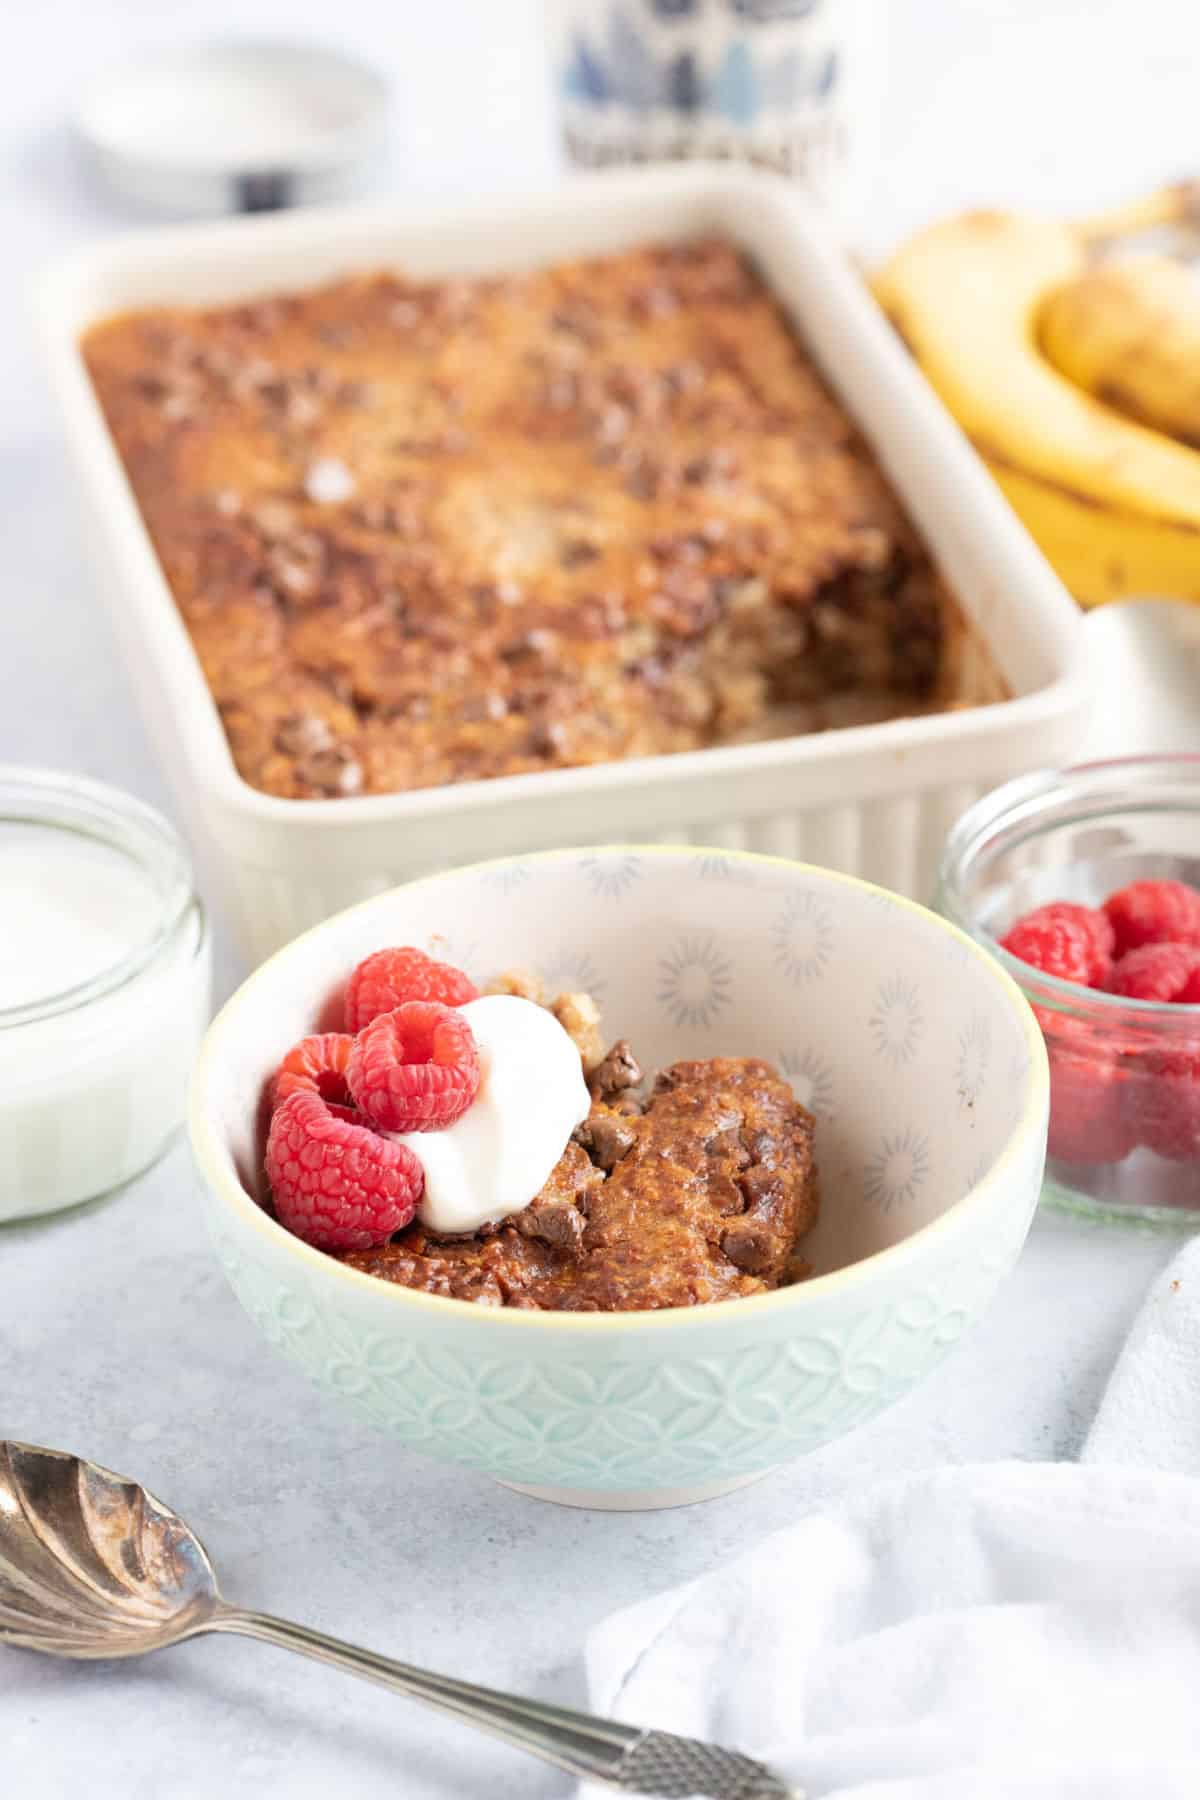 A bowl of air fryer baked oats with berries and yogurt.